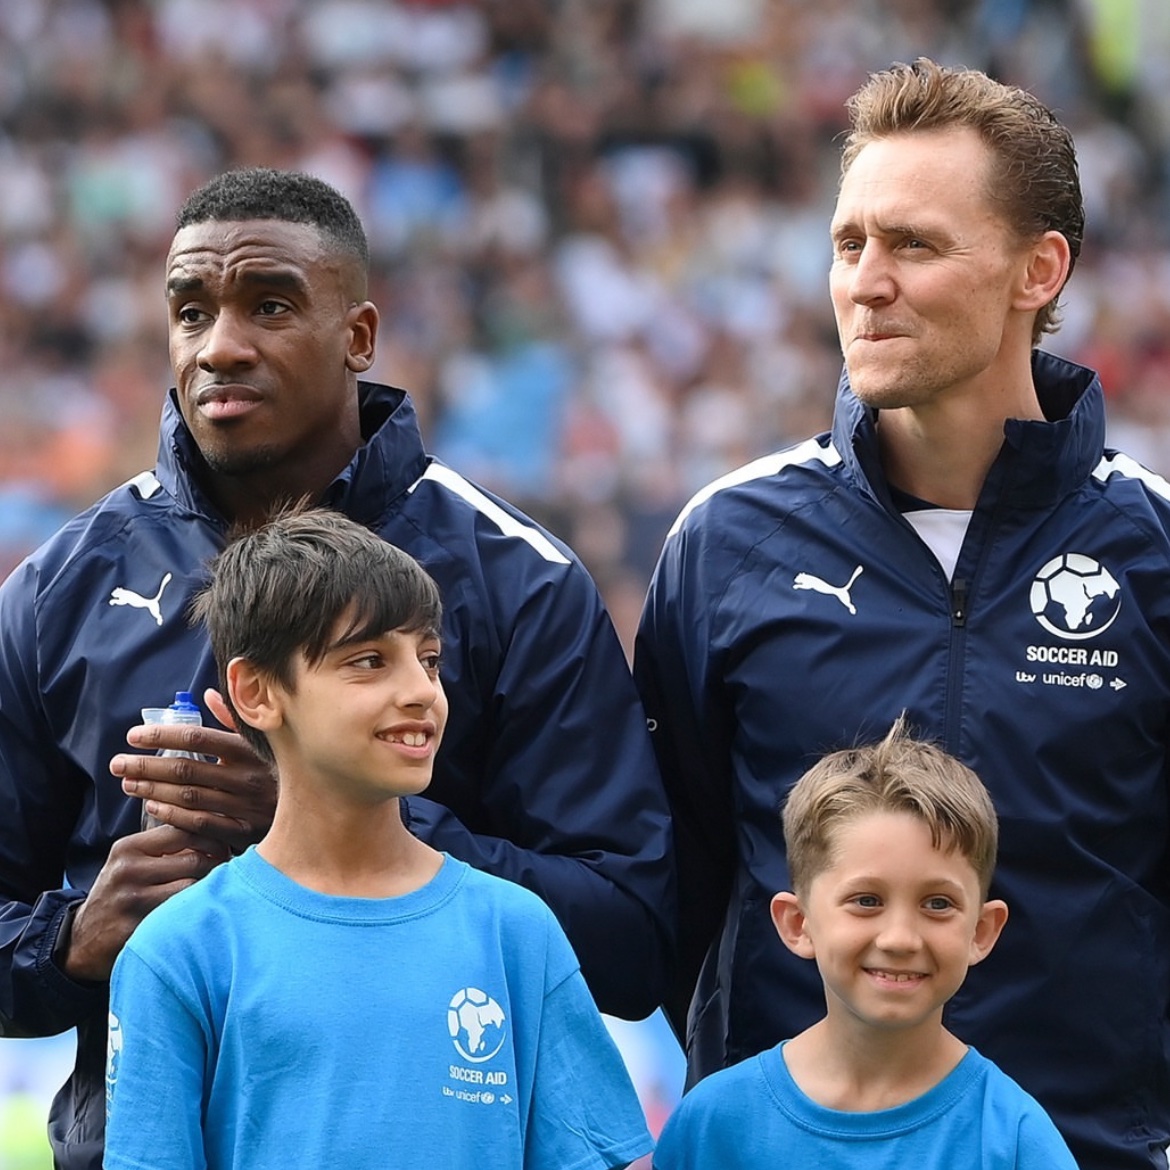 All this new picture content!

Tom Hiddleston being adorable at Soccer Aid